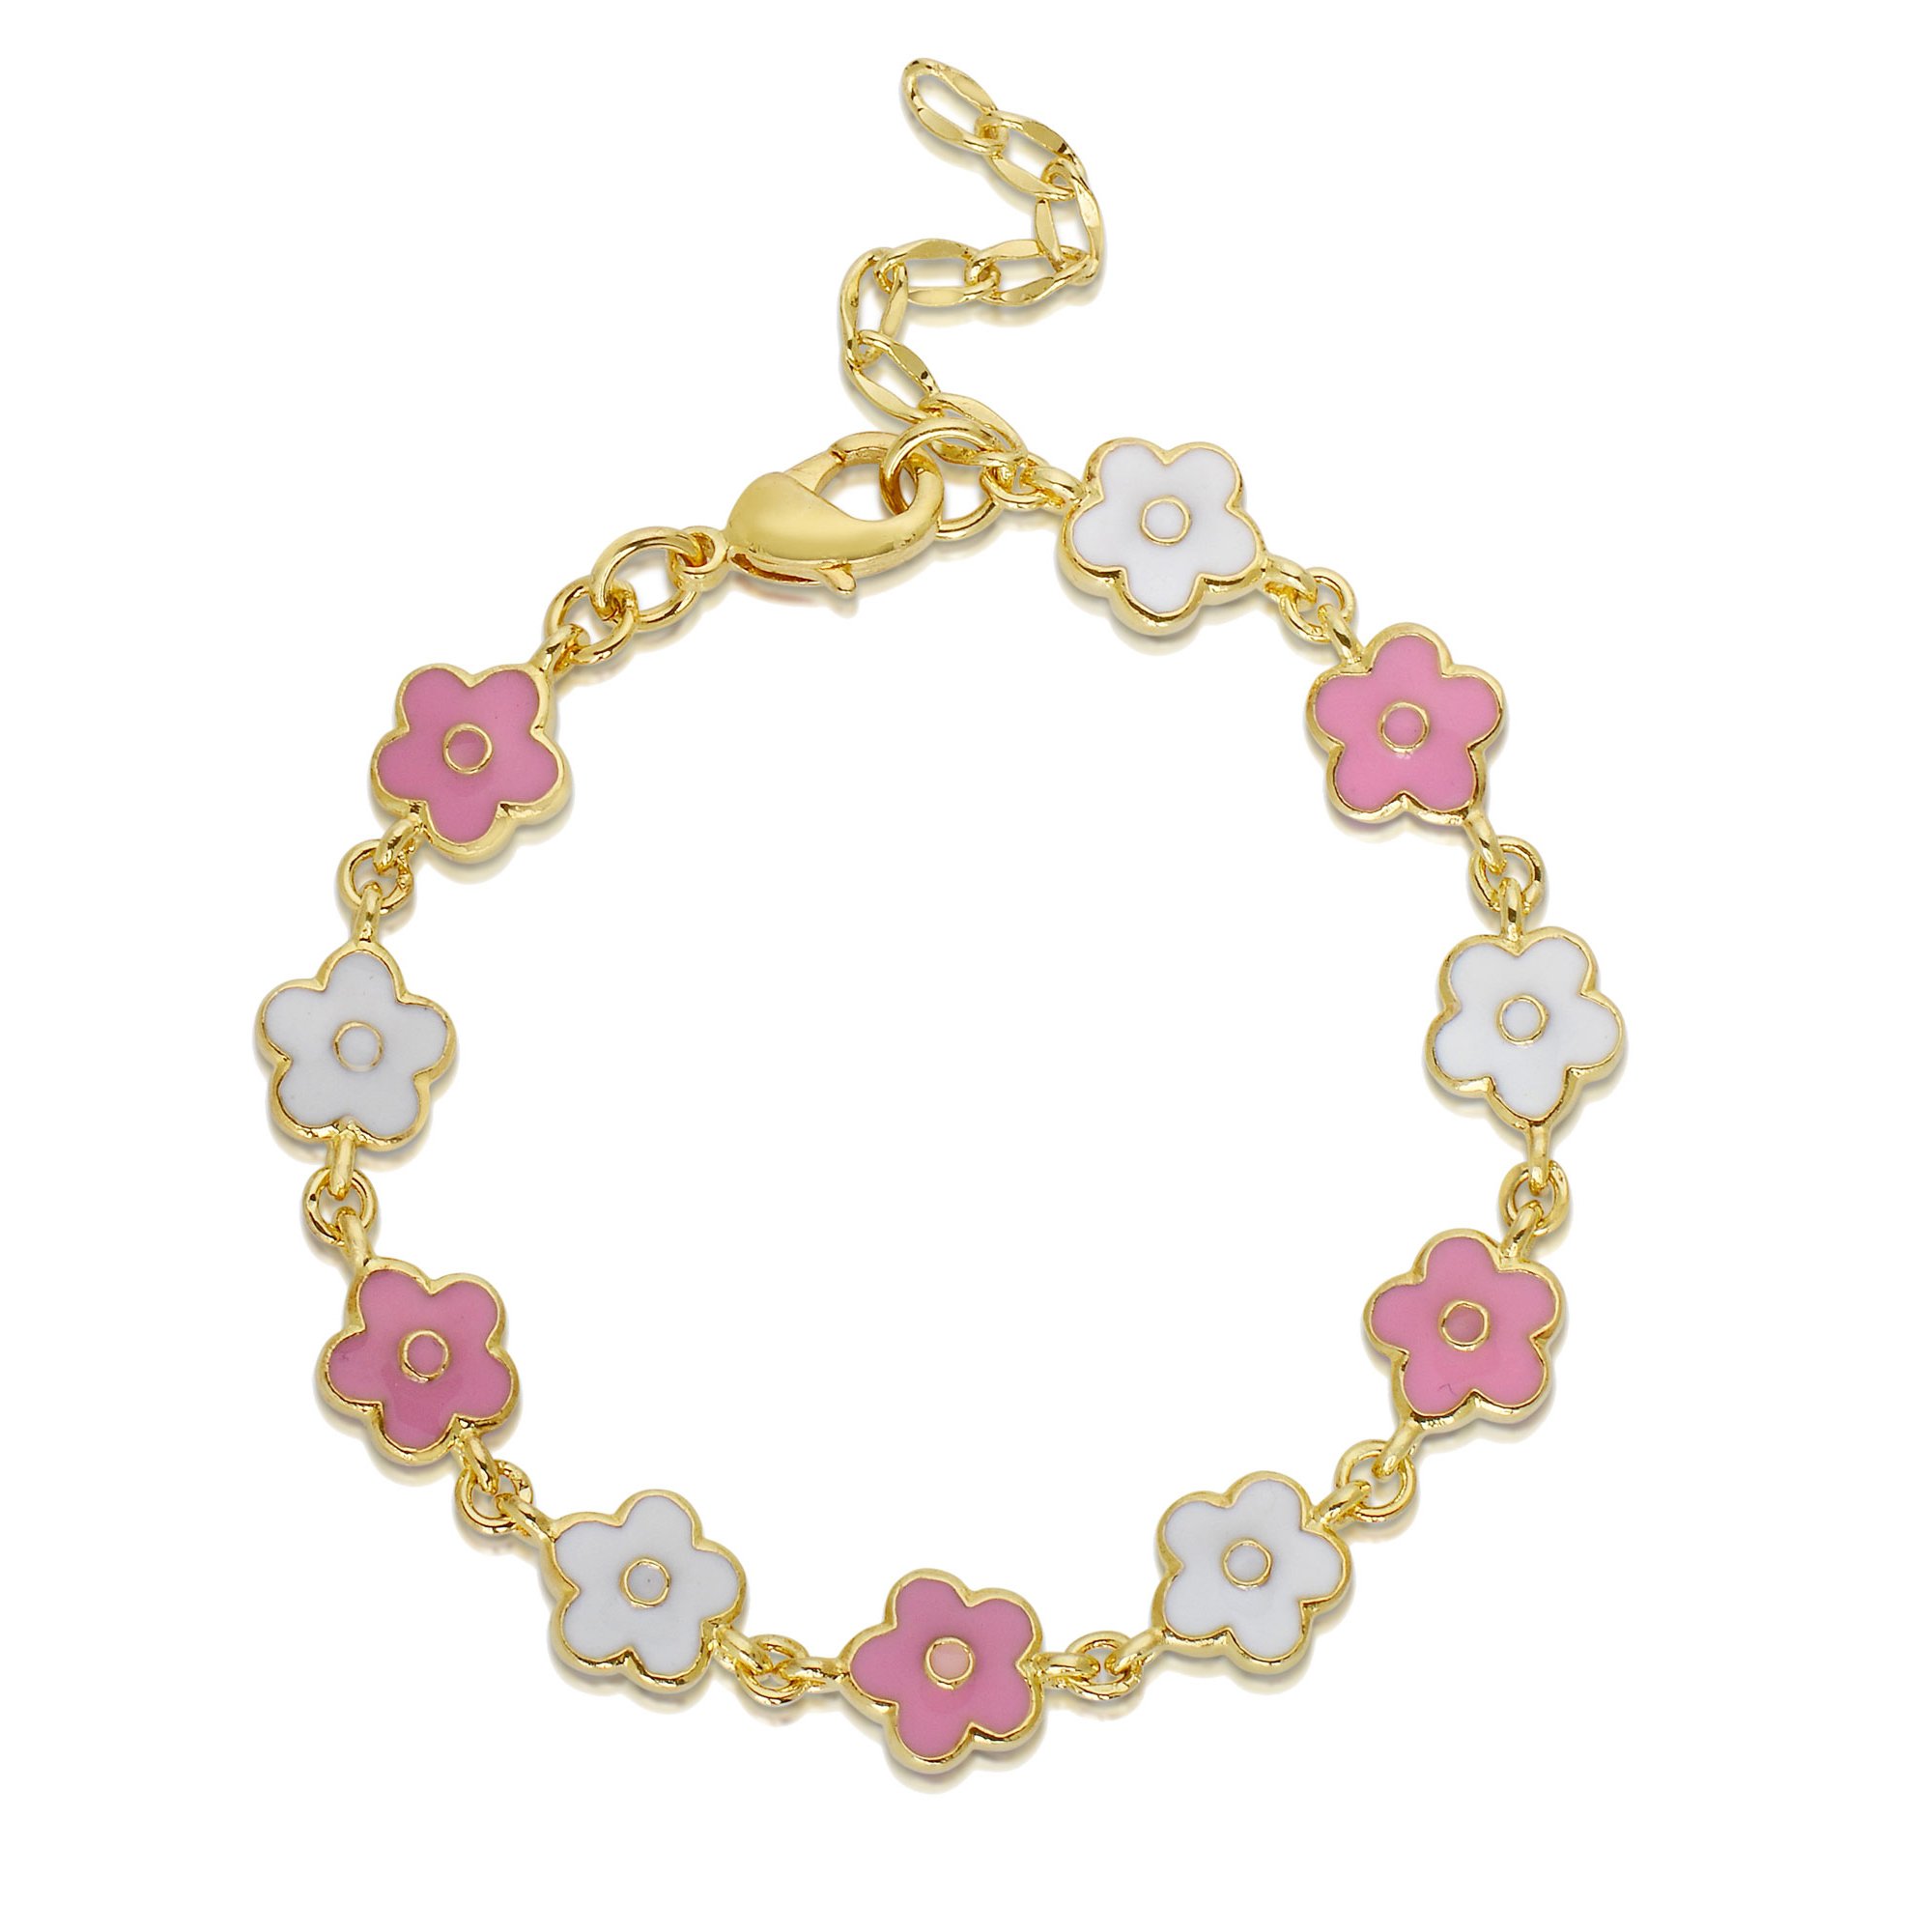 Lily Nily Pink and White Flower Link Bracelet for Little Girls